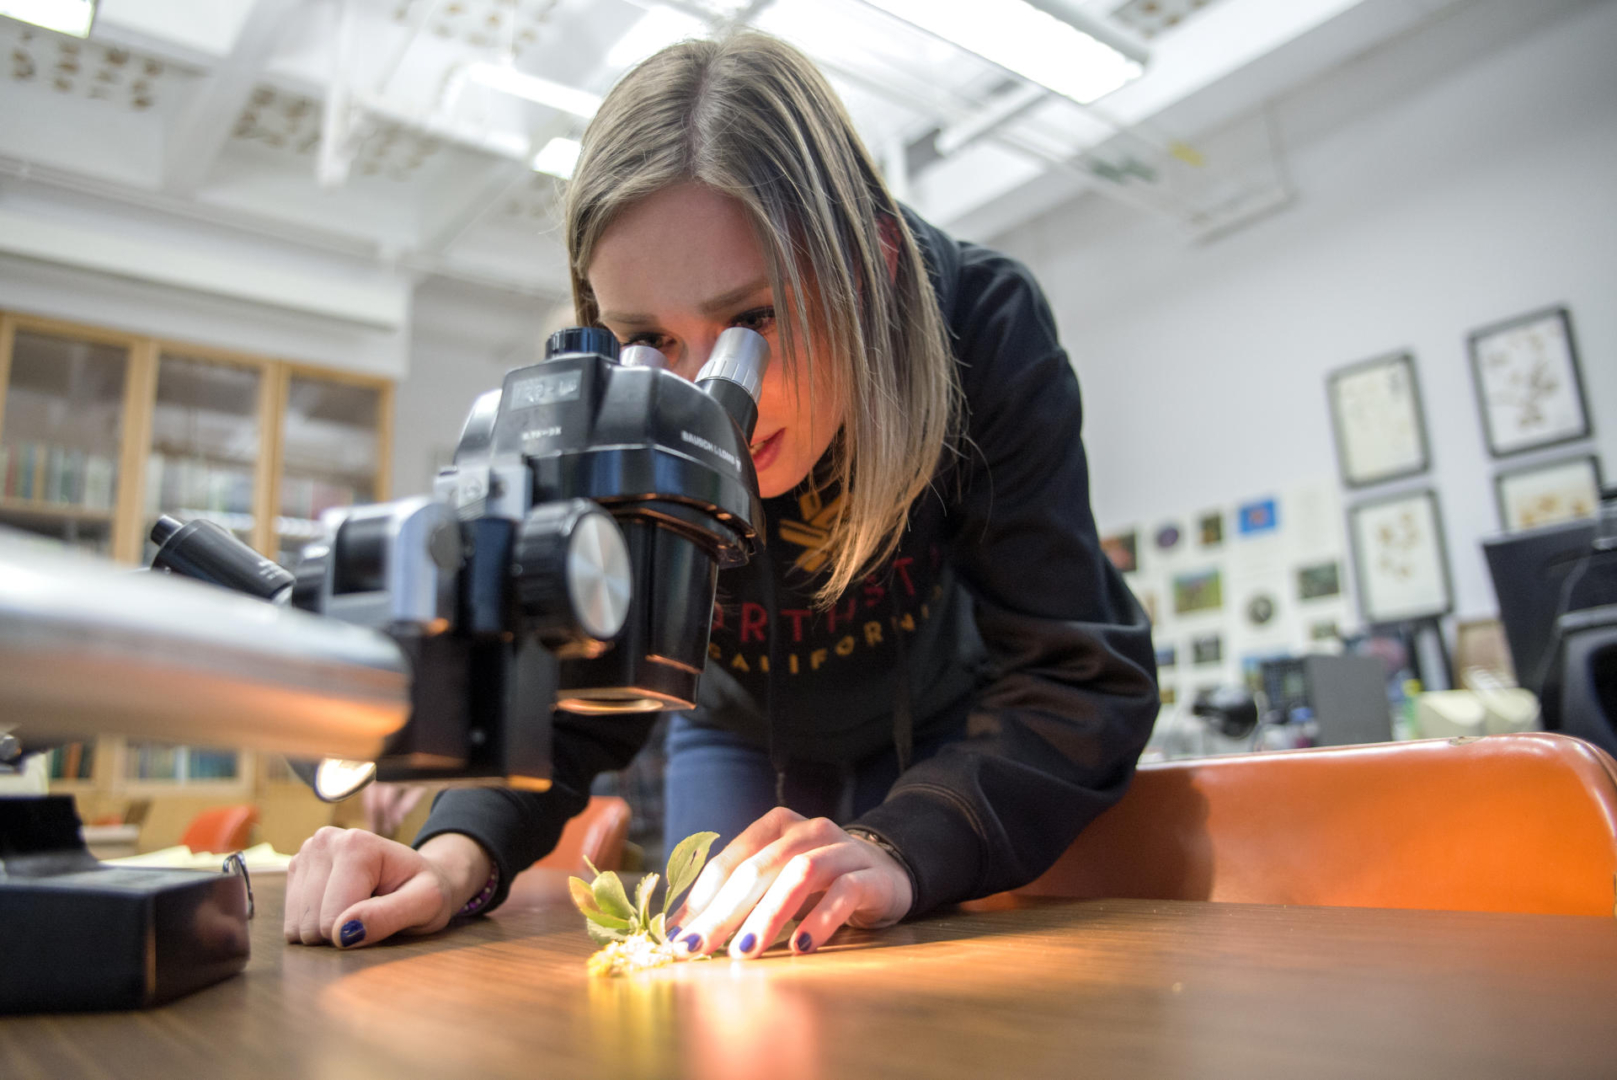 A student looks into a microscope at a plant specimen in the Herbarium.